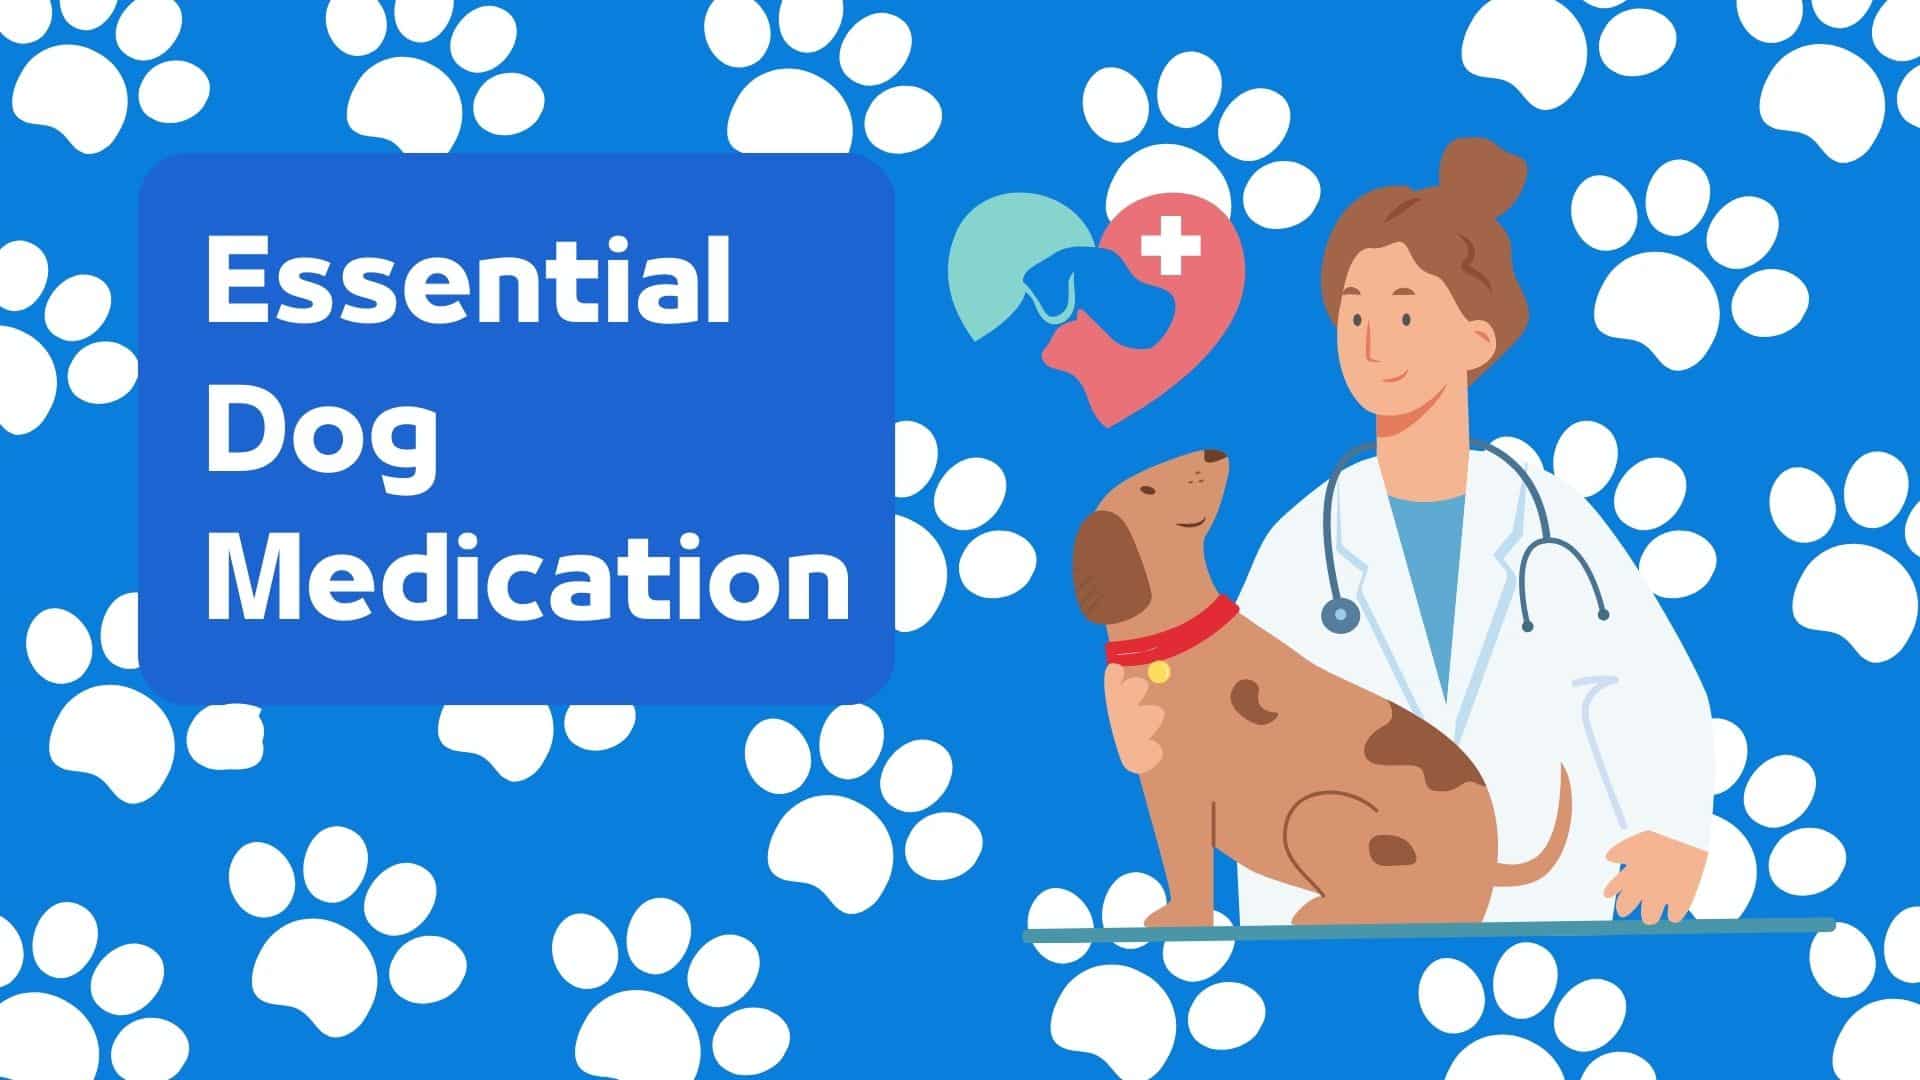 Dogs and cats e-coli prevention with medicines